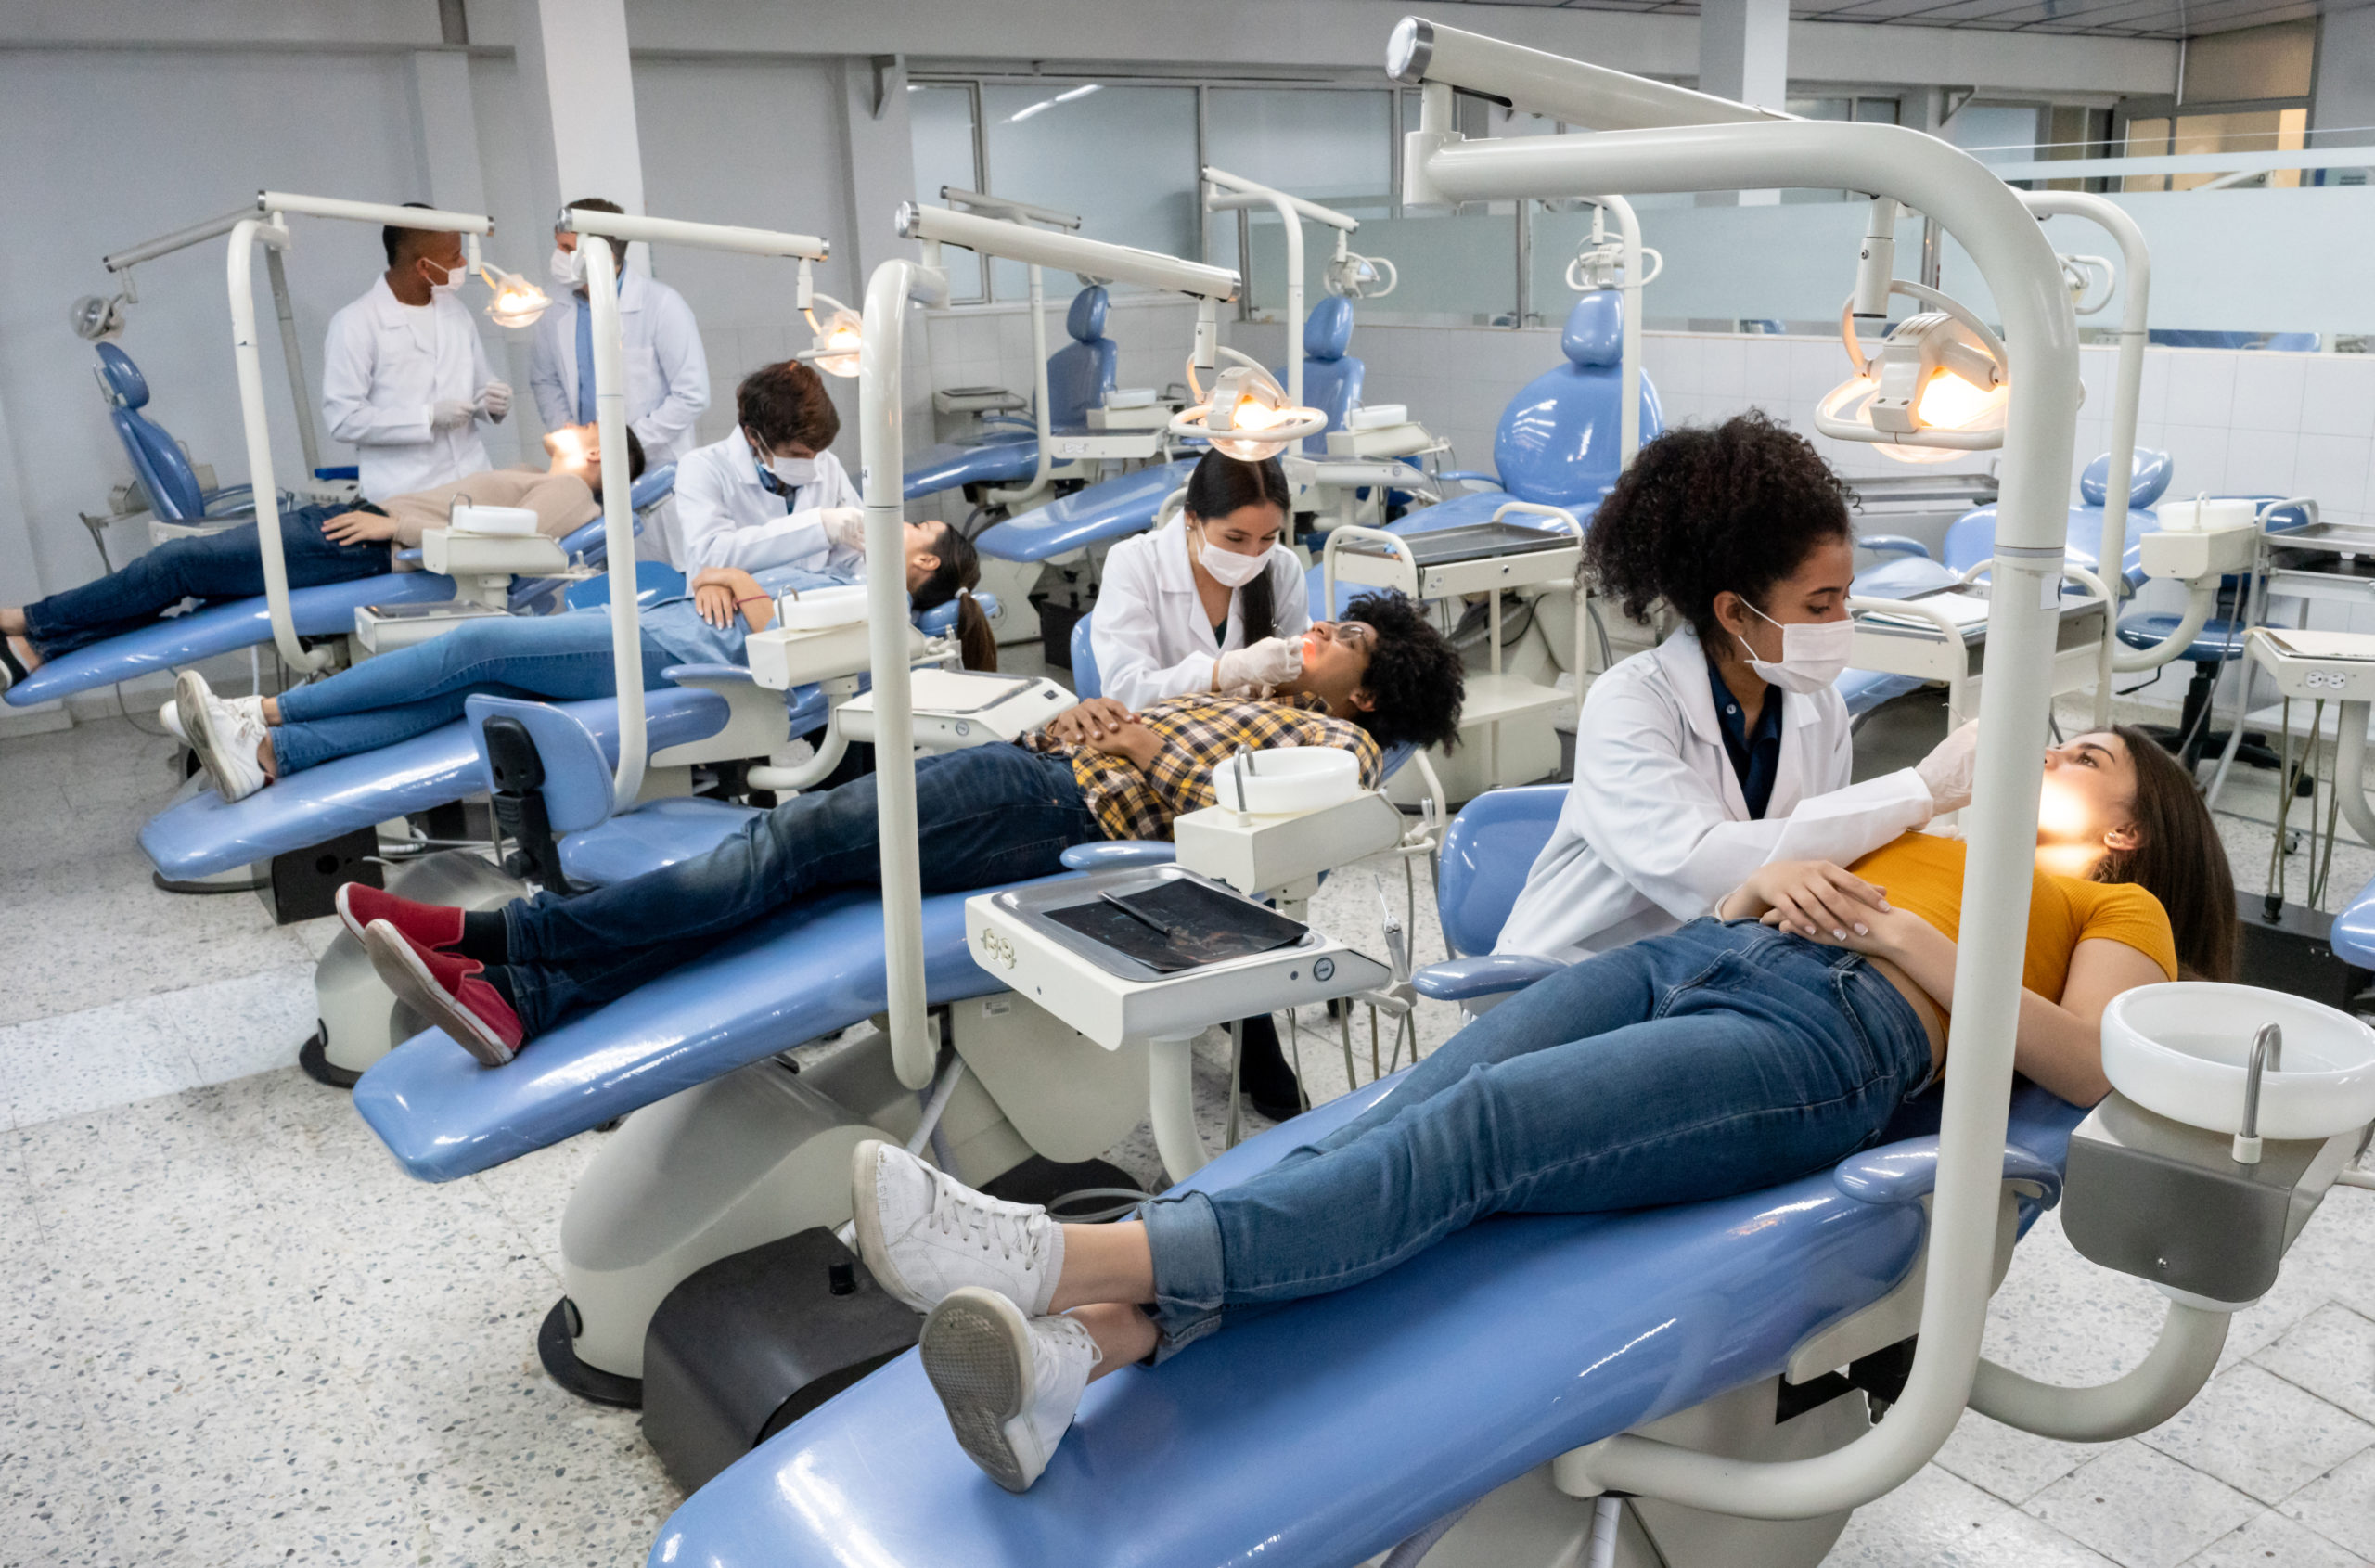 Students at dental school examining the teeth of some patients